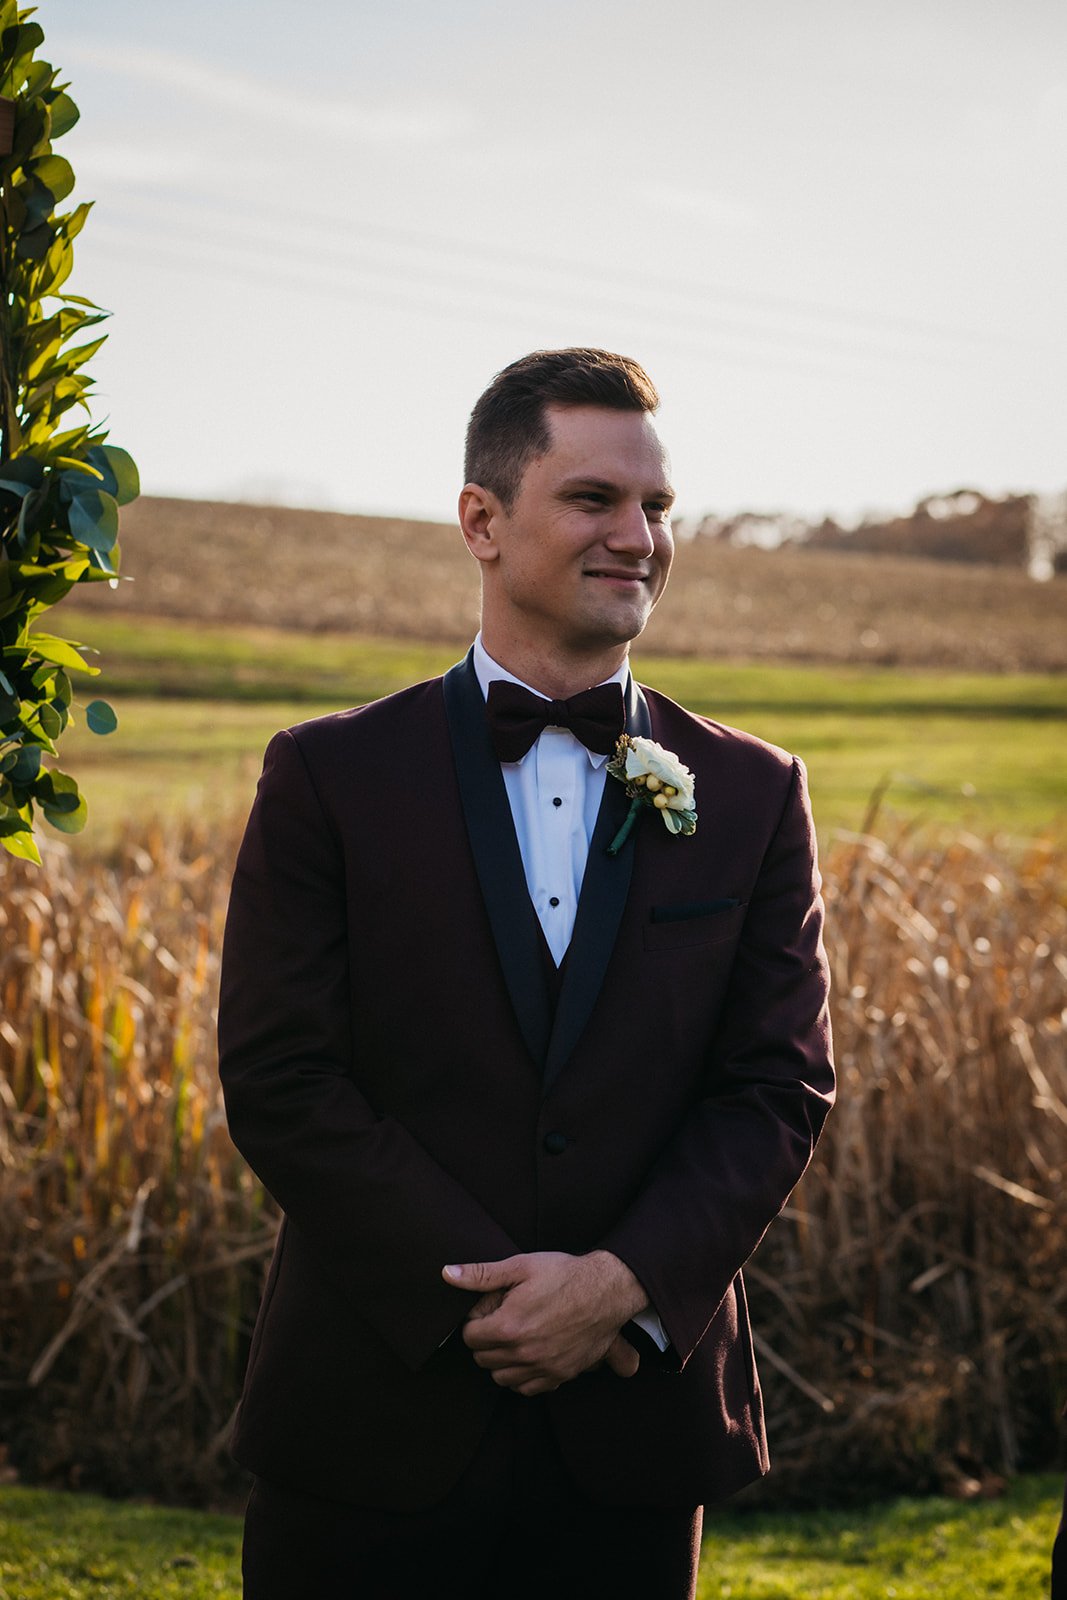 A groom on his wedding day at the ceremony.